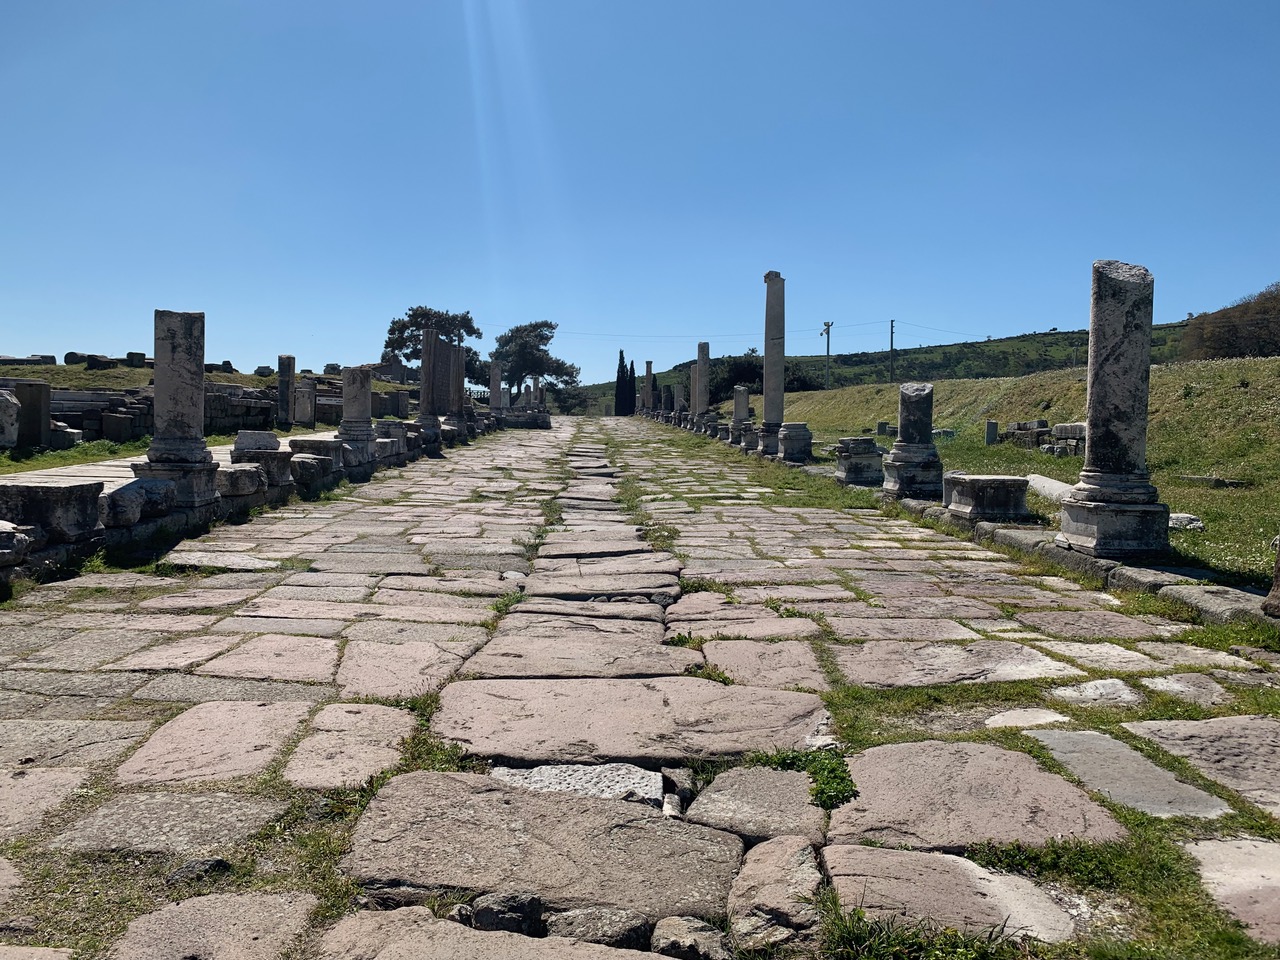 Roman road with half standing arches and drainage drench